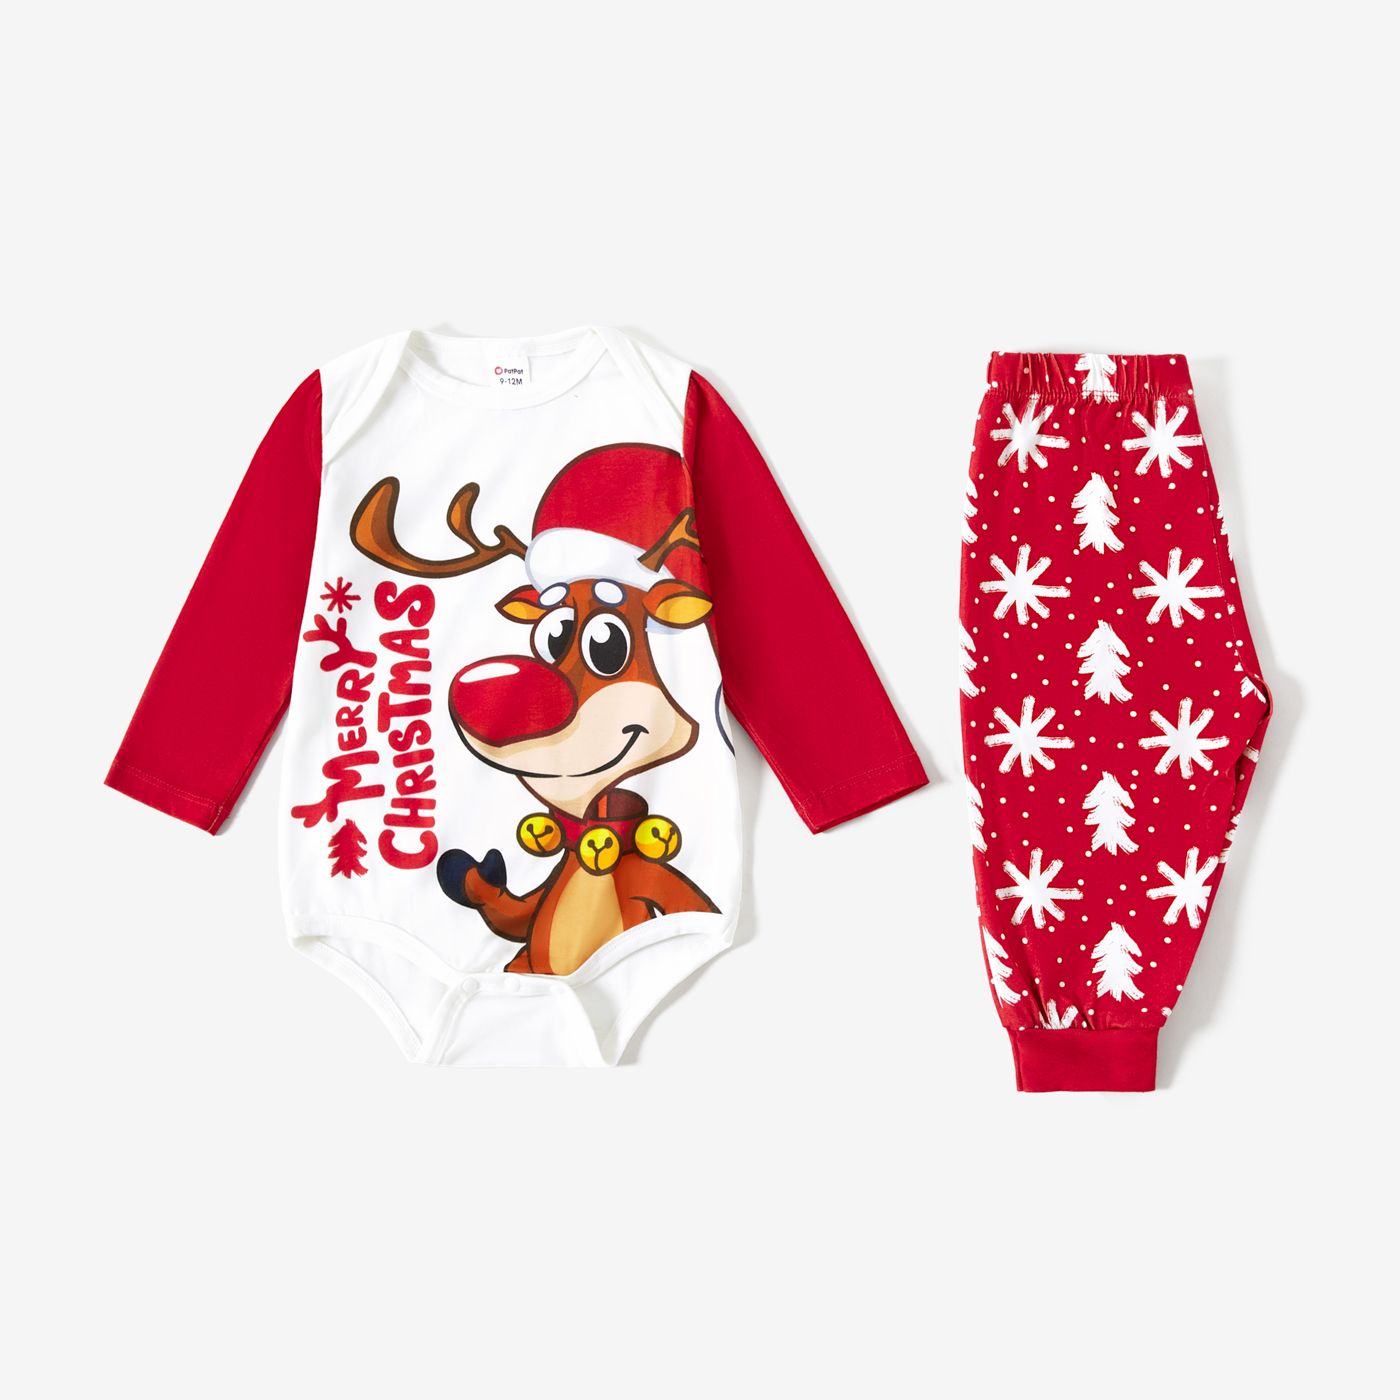 Christmas Reindeer and Letter Print Red Family Matching Long-sleeve Pajamas Sets (Flame Resistant)